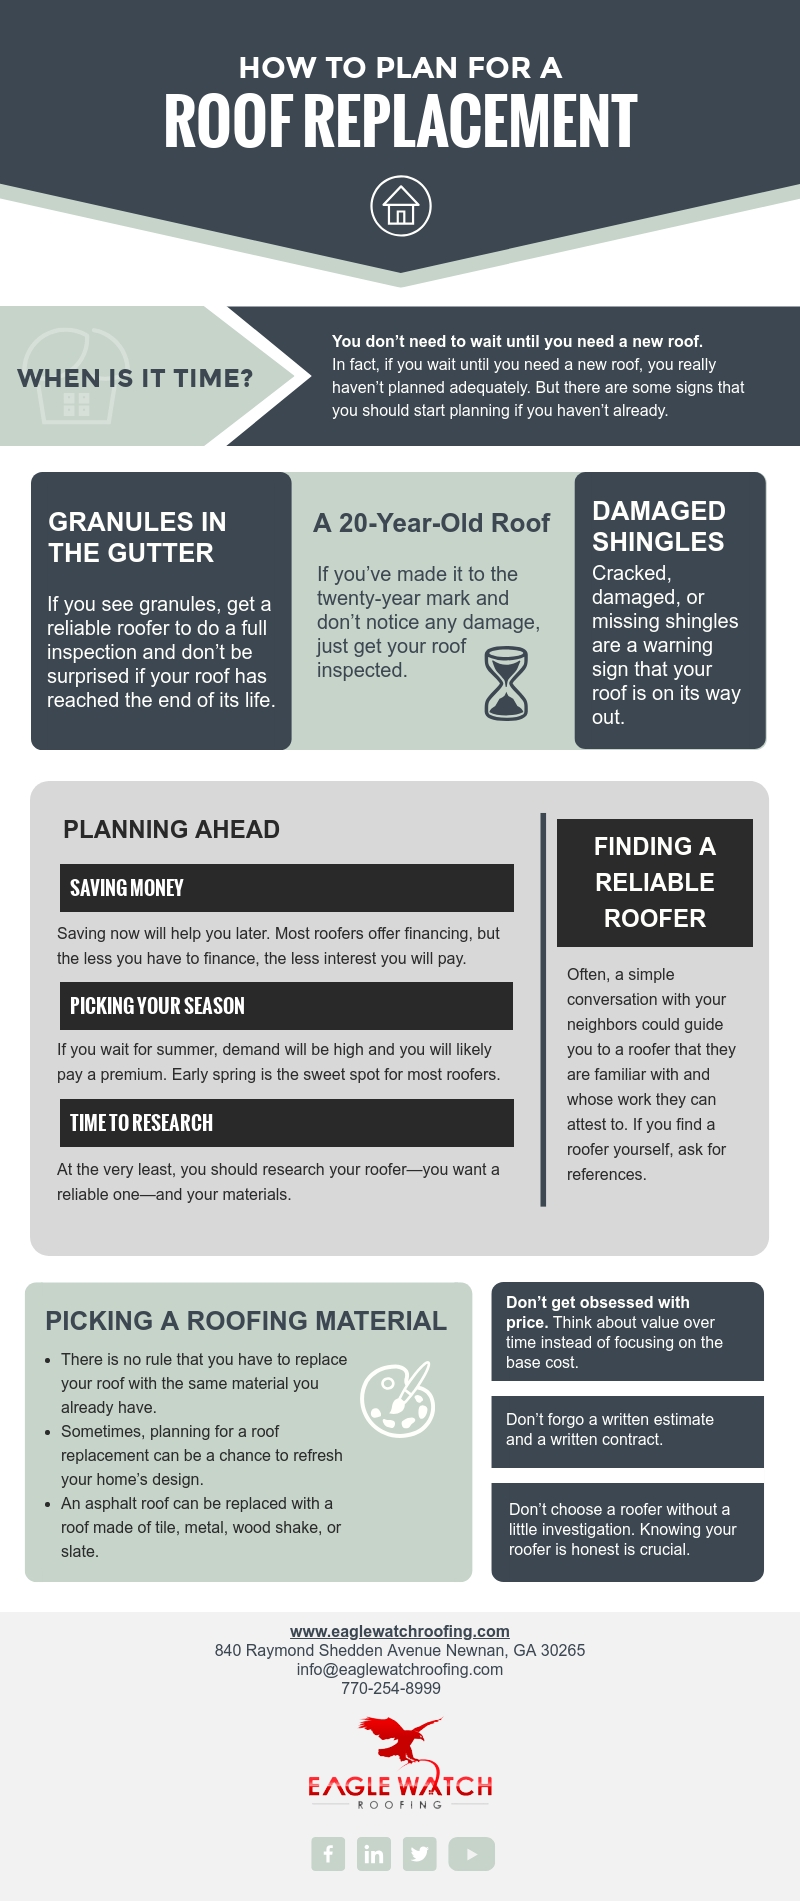 How to Plan for a Roof Replacement [infographic]